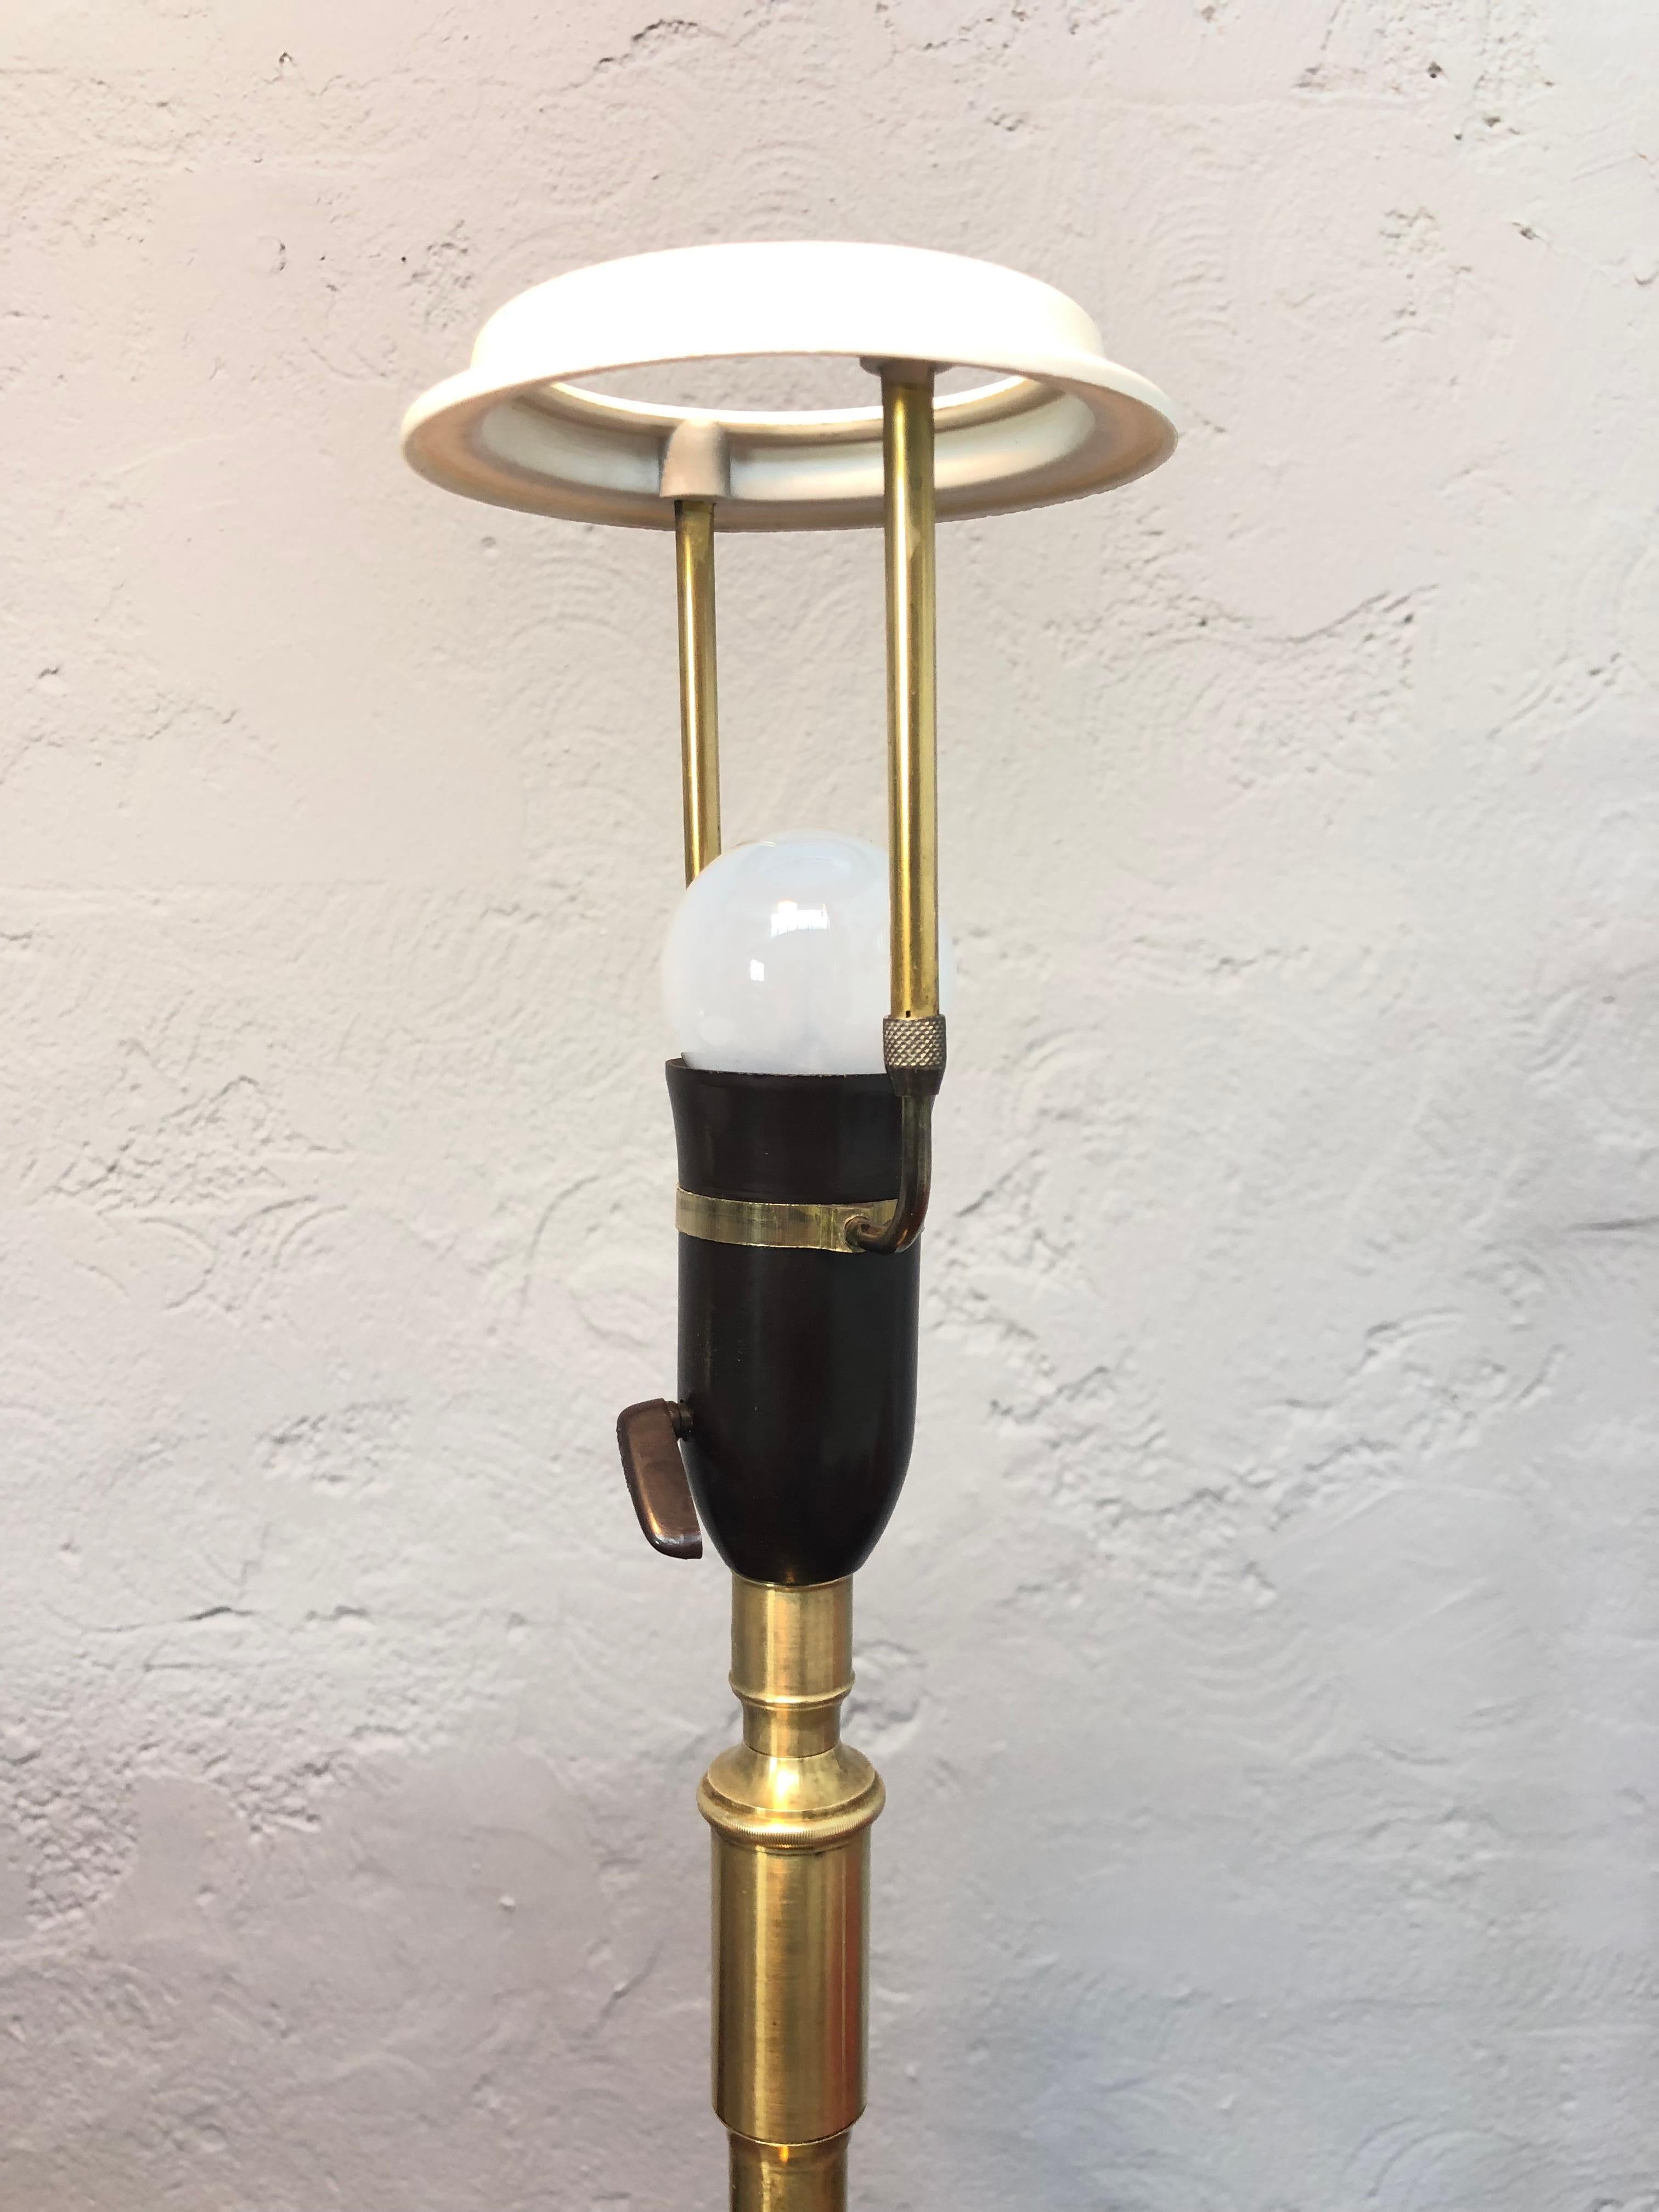 Vintage Pair of Brass Table Lamps by Esben Klint for Le Klint from the 1950s In Good Condition For Sale In Søborg, DK